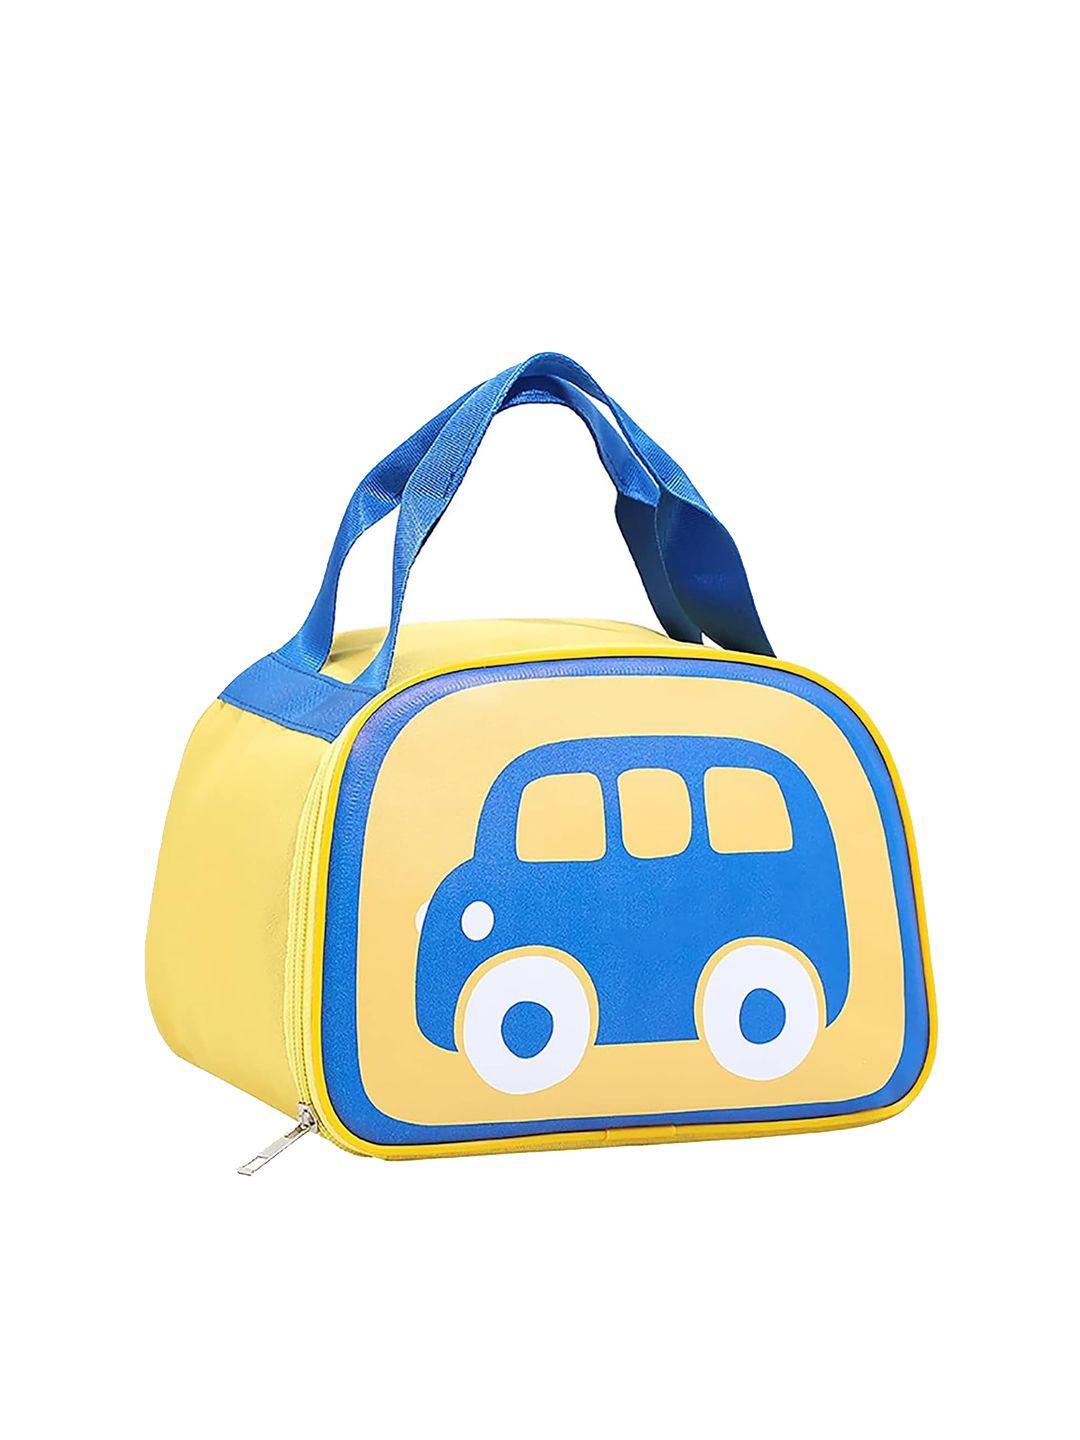 house of quirk yellow & blue printed waterproof insulated lunch bag